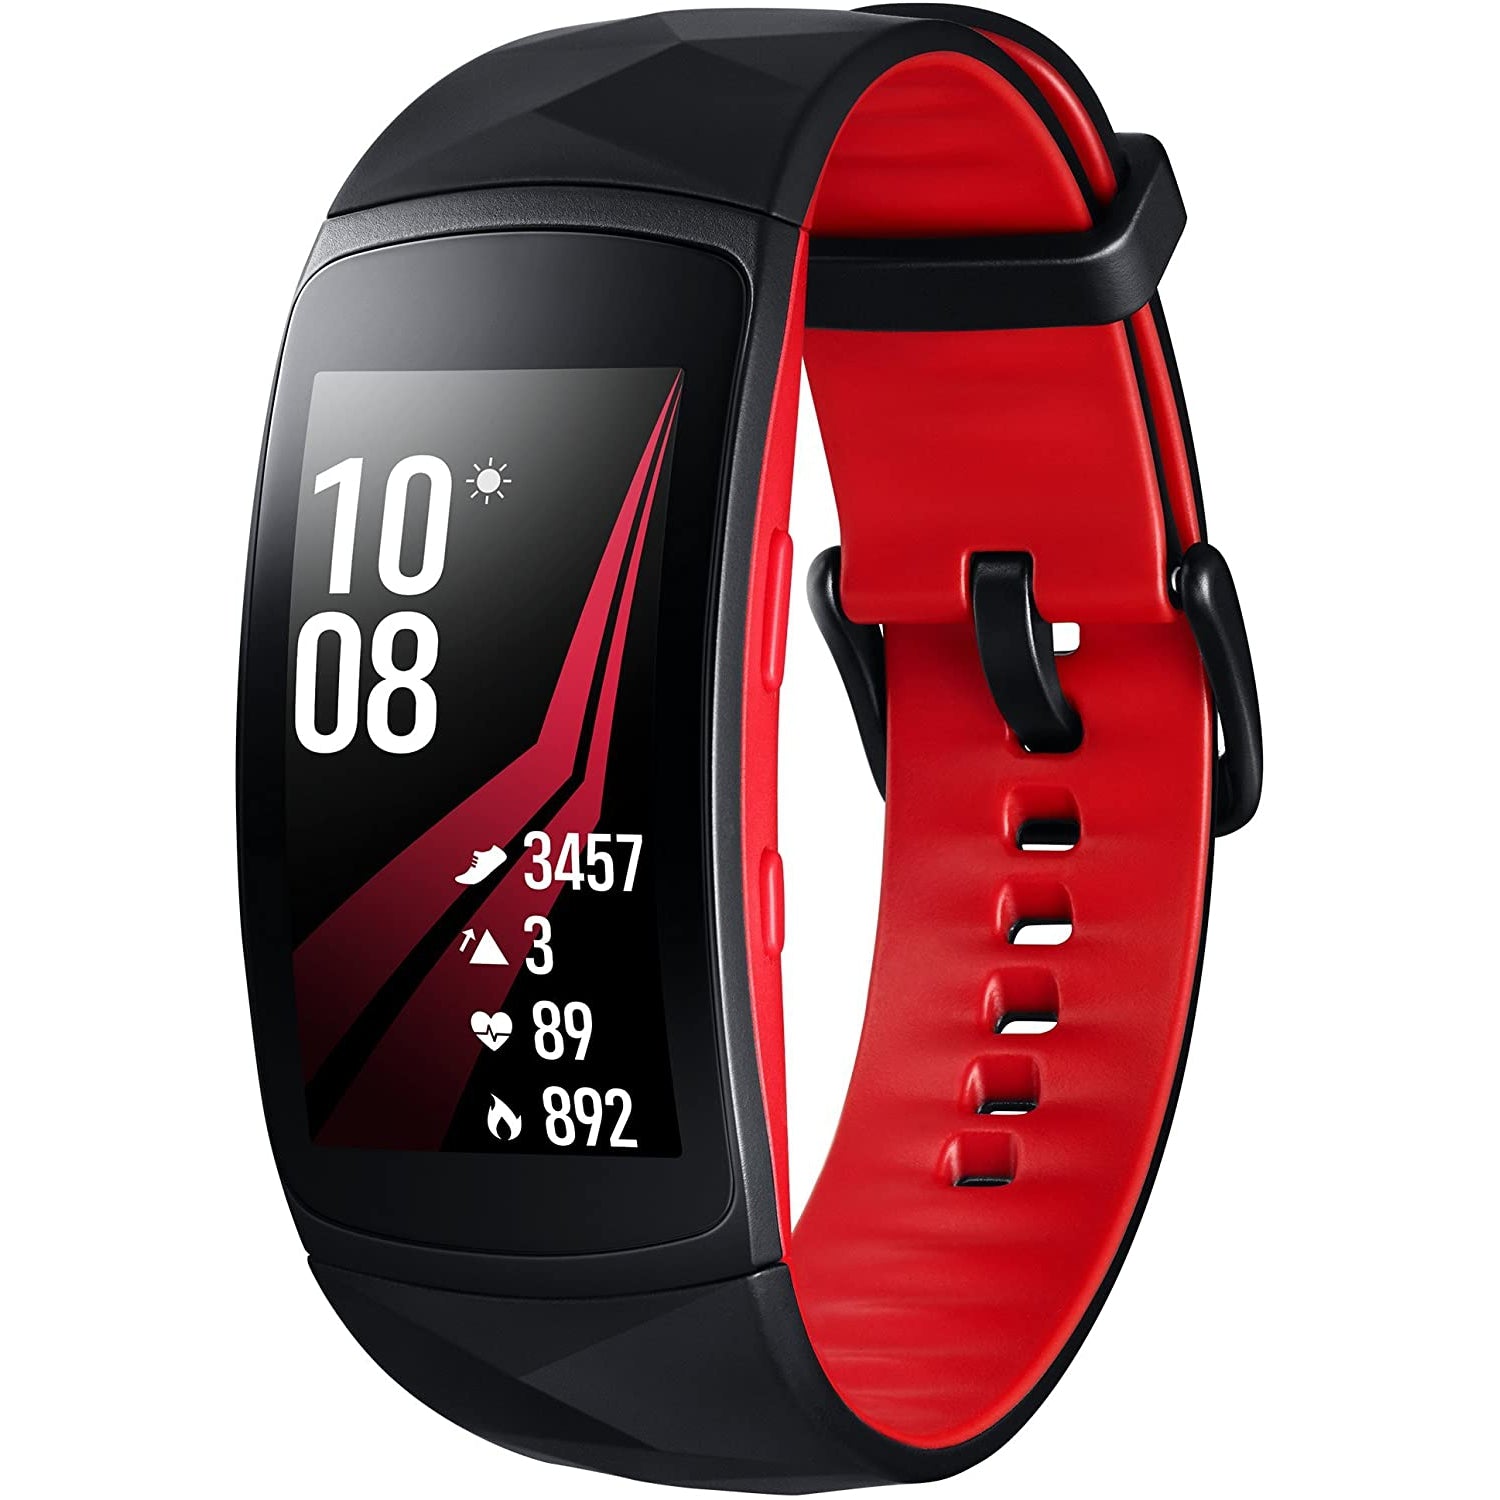 Samsung Gear Fit 2 Pro Fitness Tracker - Red